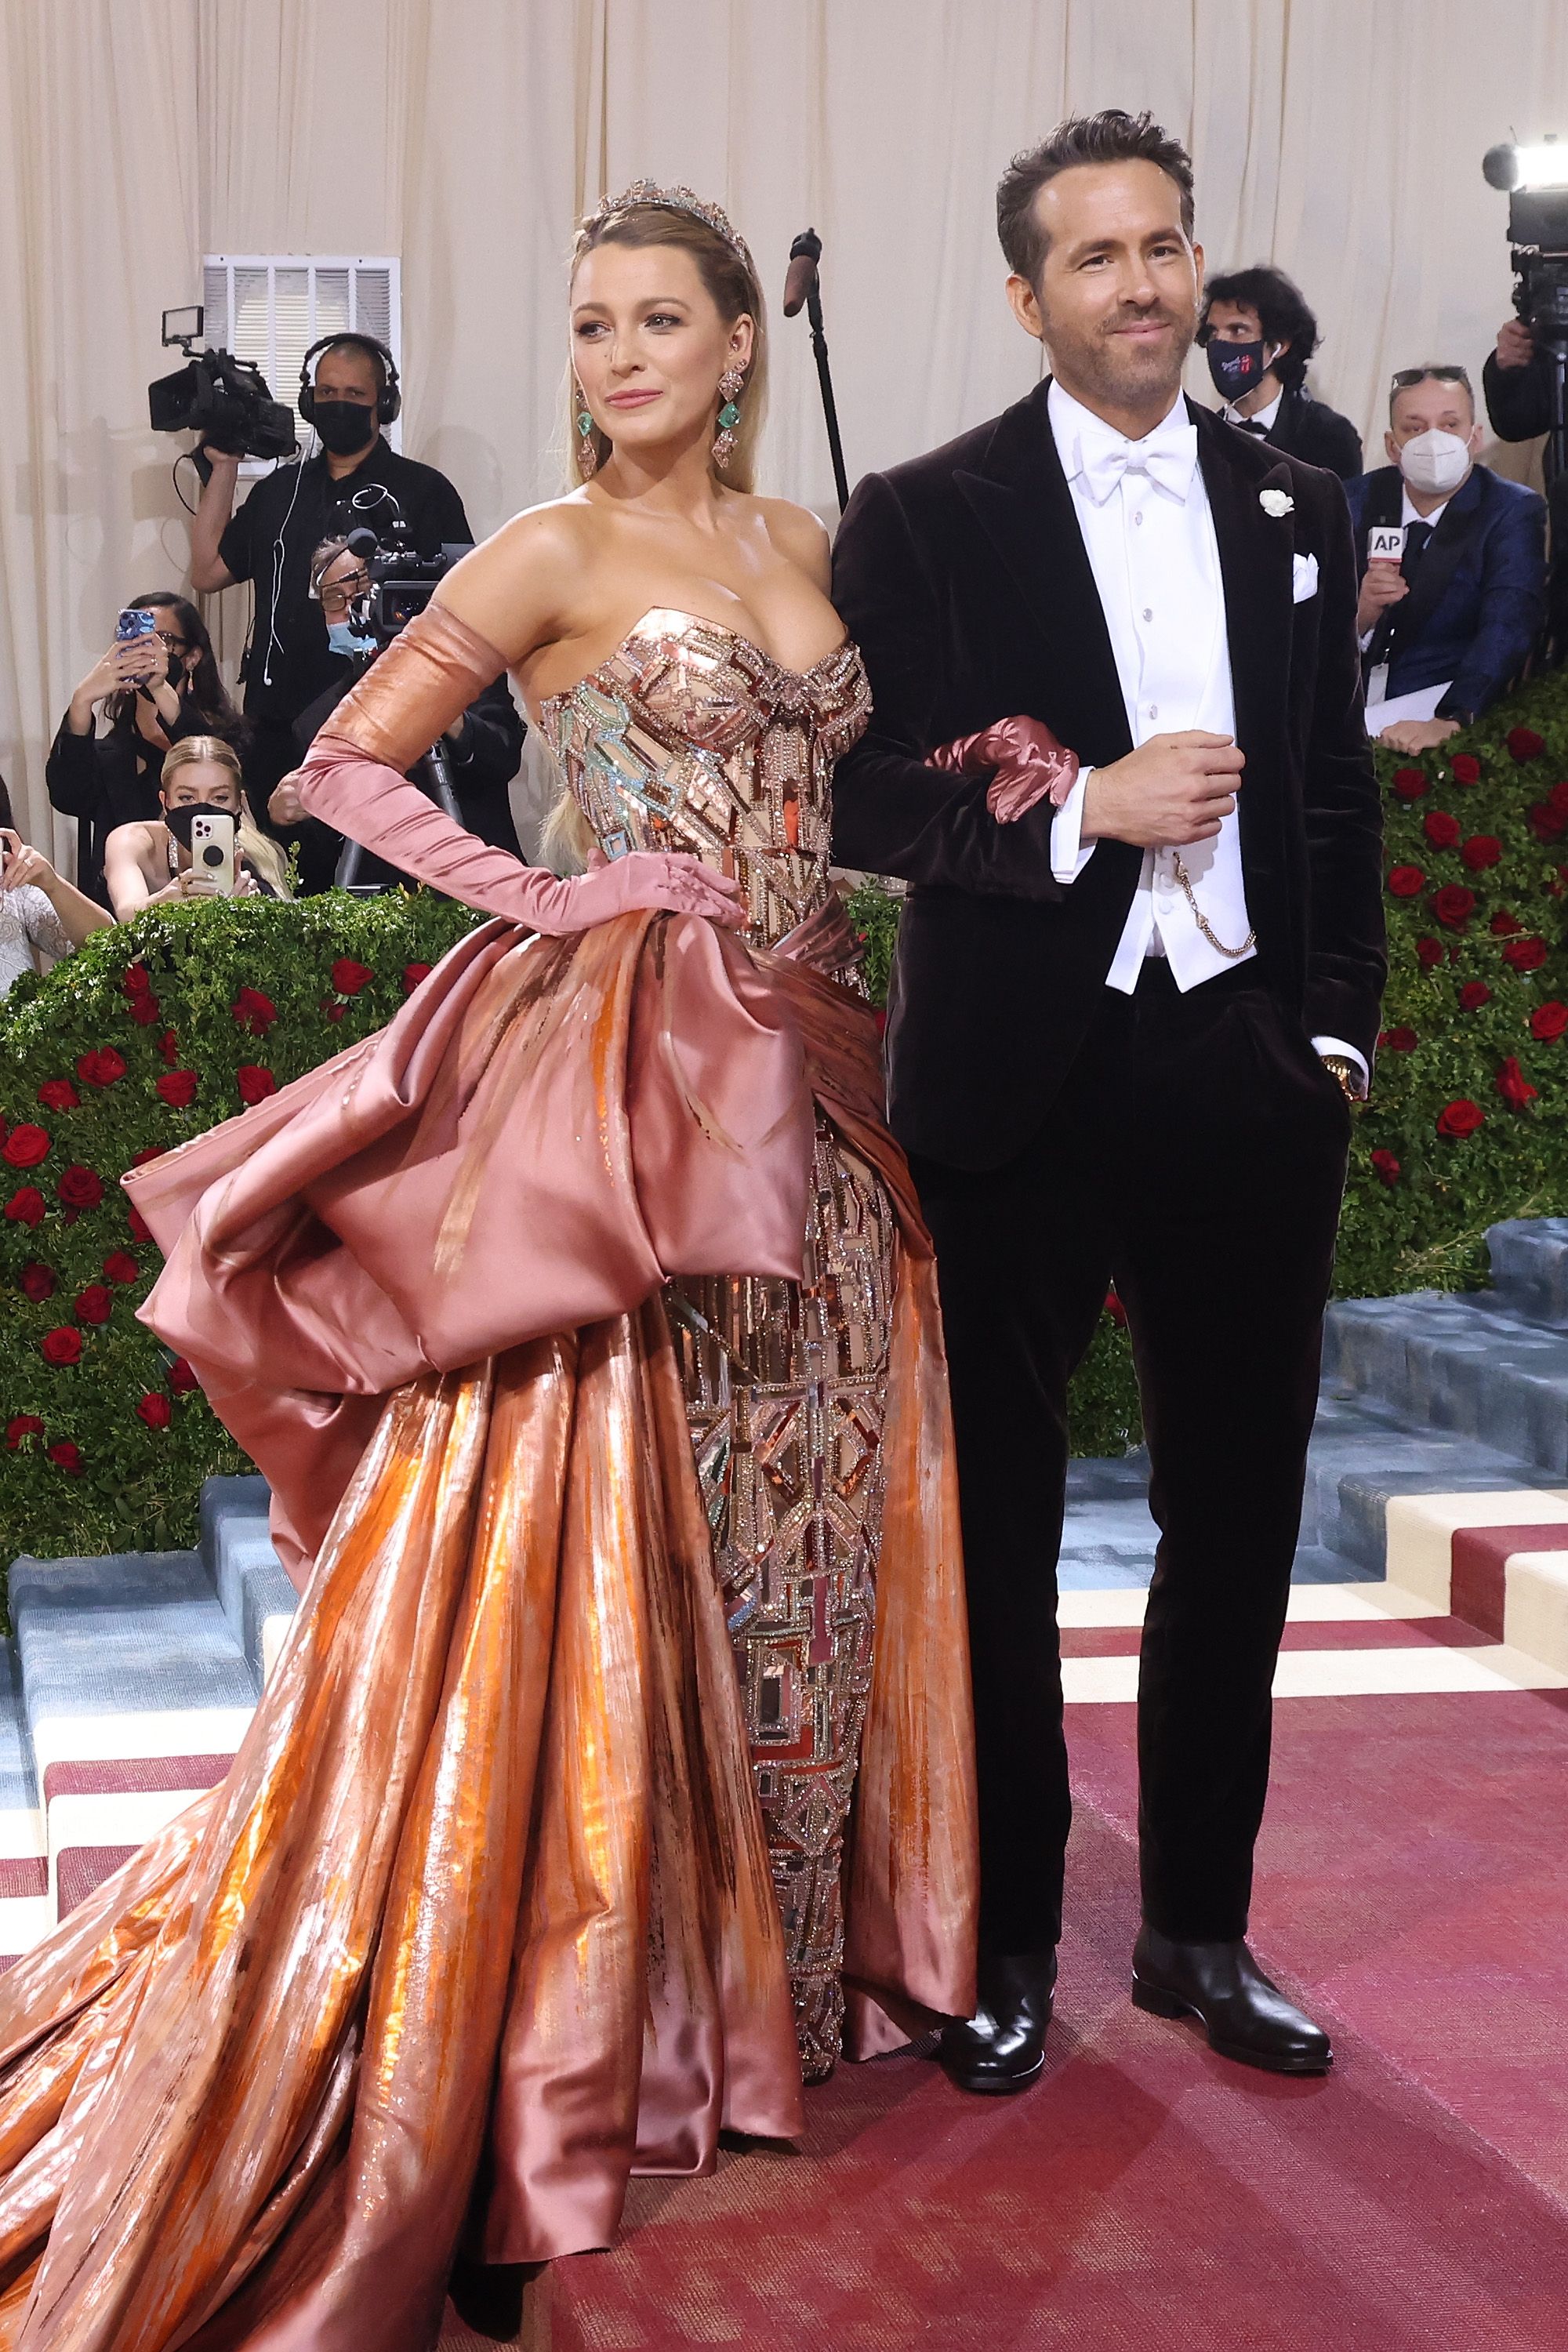 Met Gala 2022 Gilded Age: All The Best Red Carpet Looks